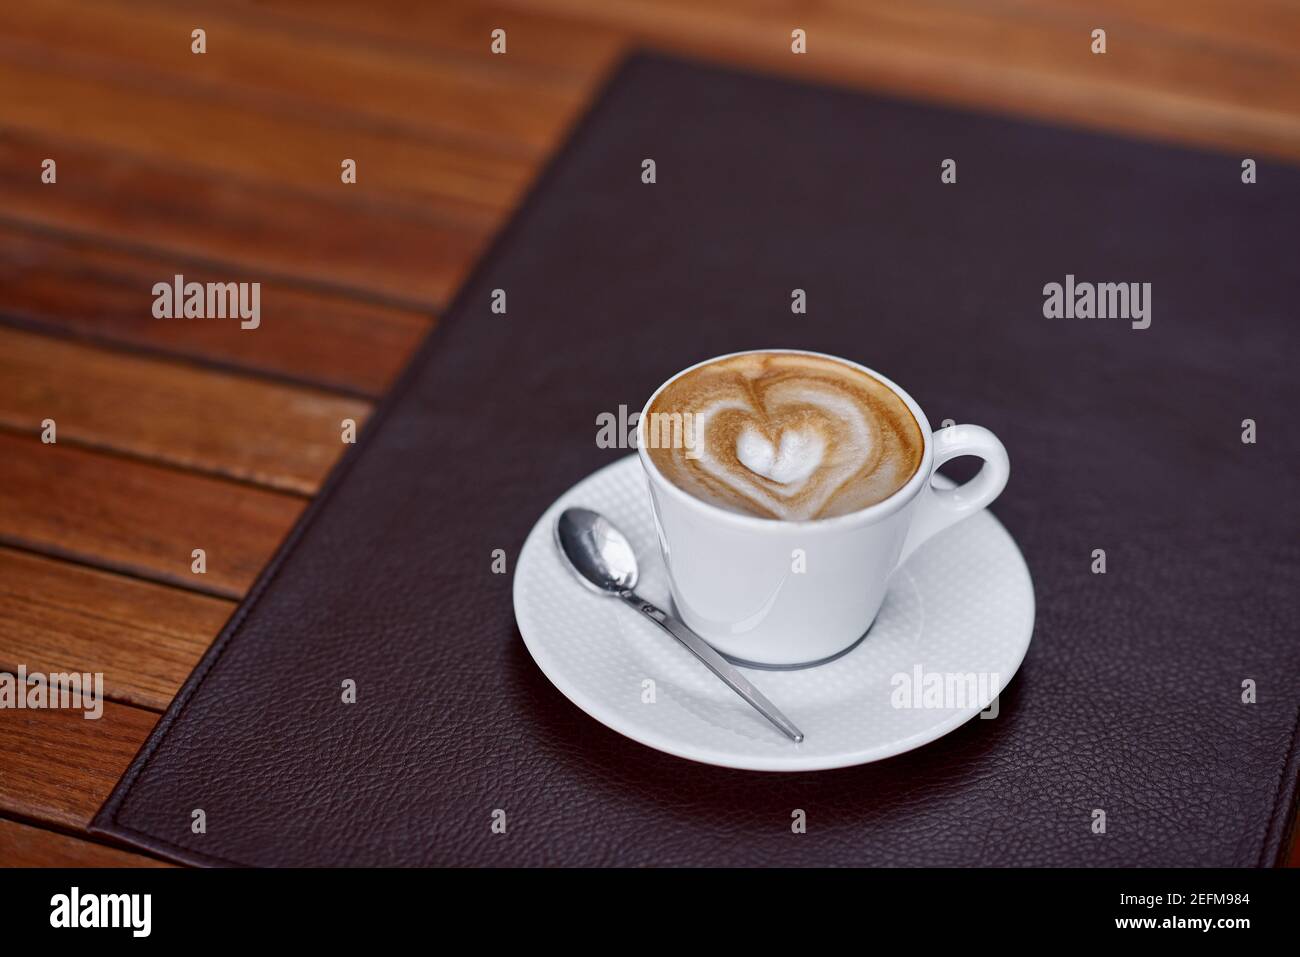 Coffee cup with a heart design Stock Photo